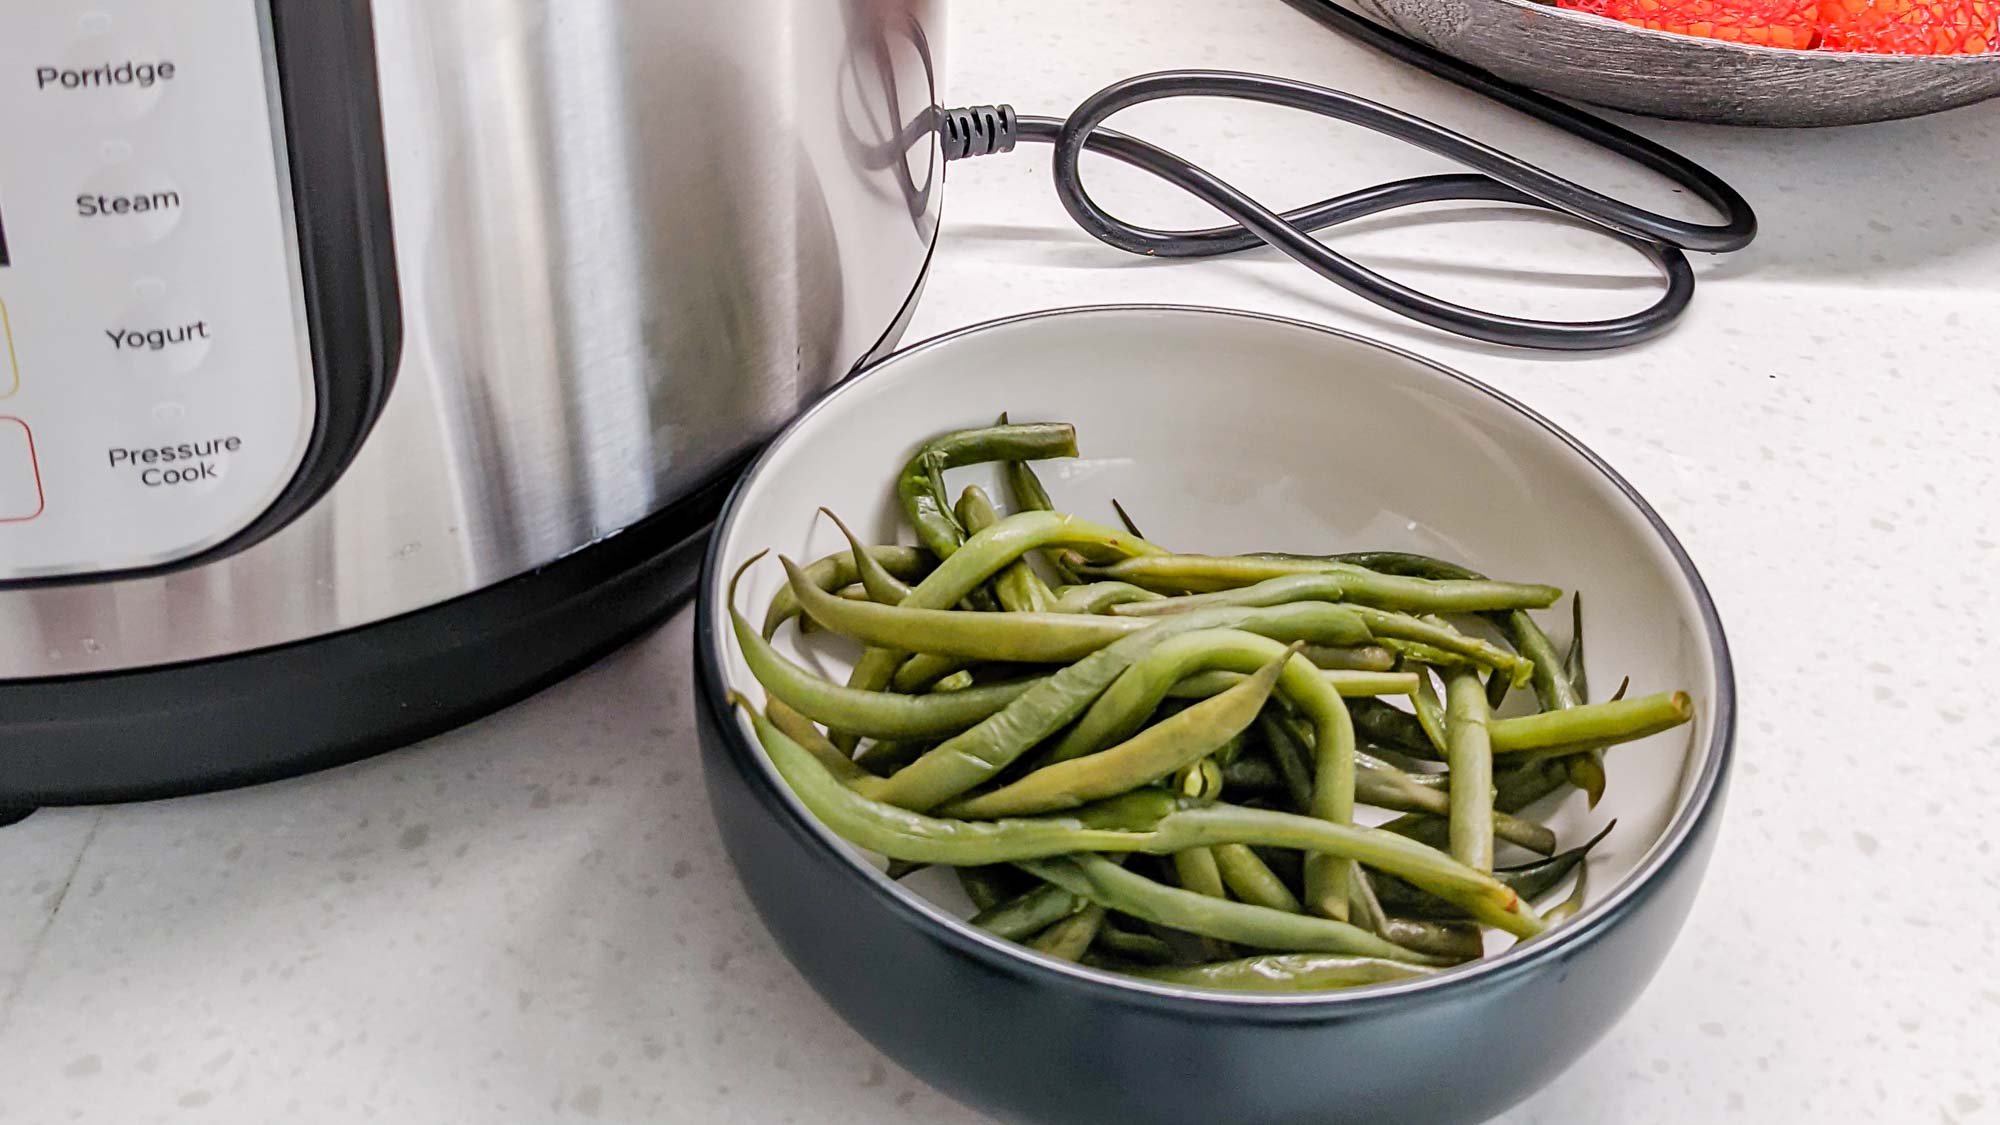 Instant Pot Duo Nova with cooked string beans